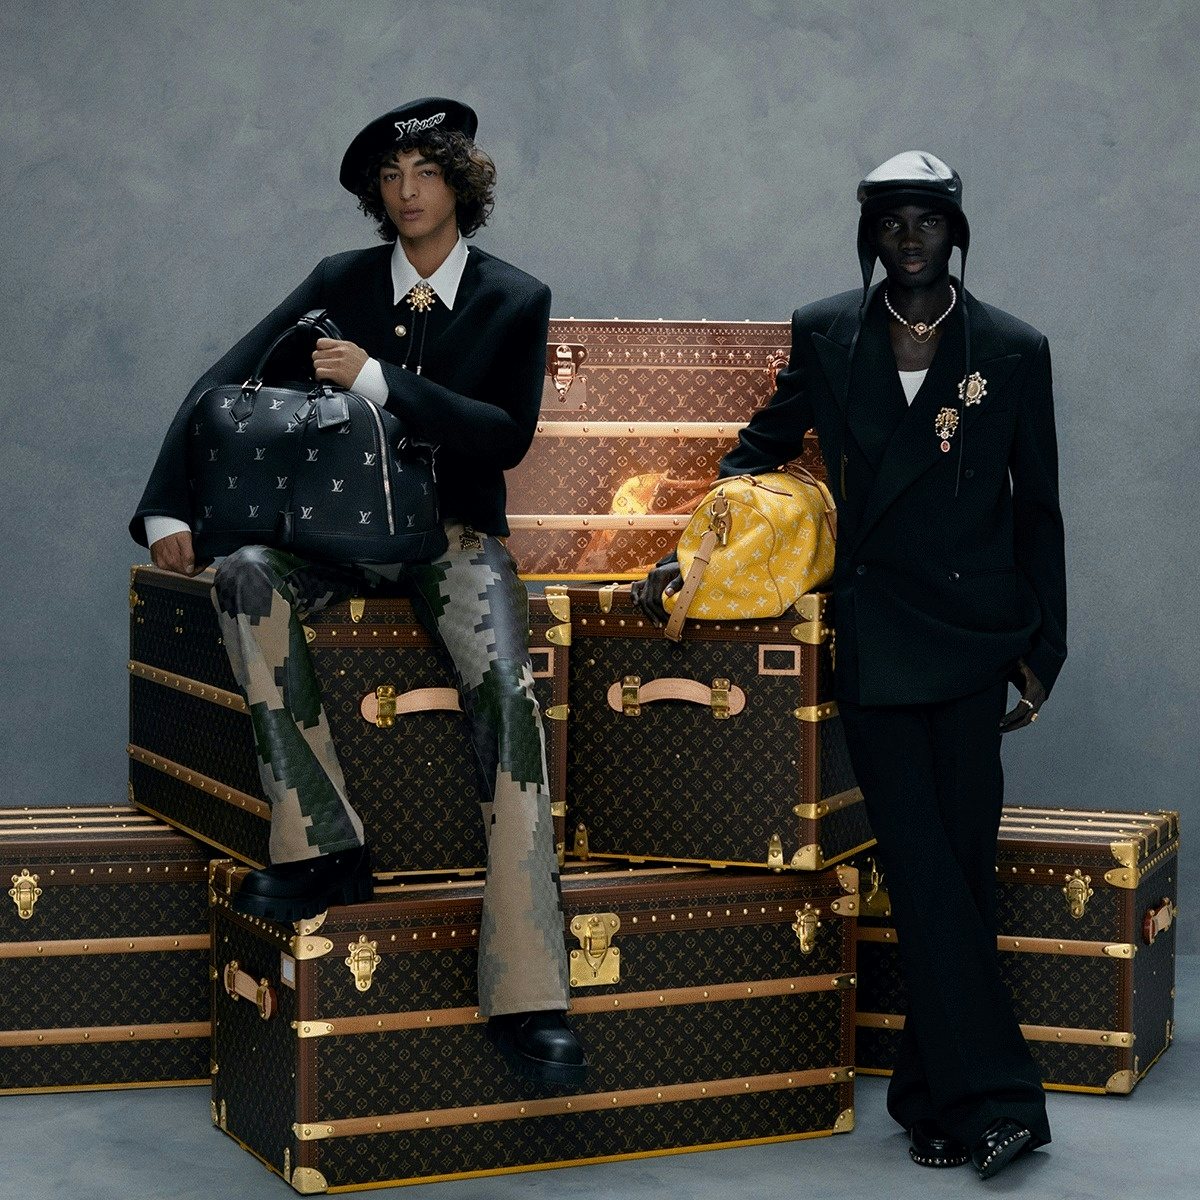 Pharrell Williams respects Louis Vuitton’s core values and iconic codes while delivering a refreshed vision. Photo: Louis Vuitton